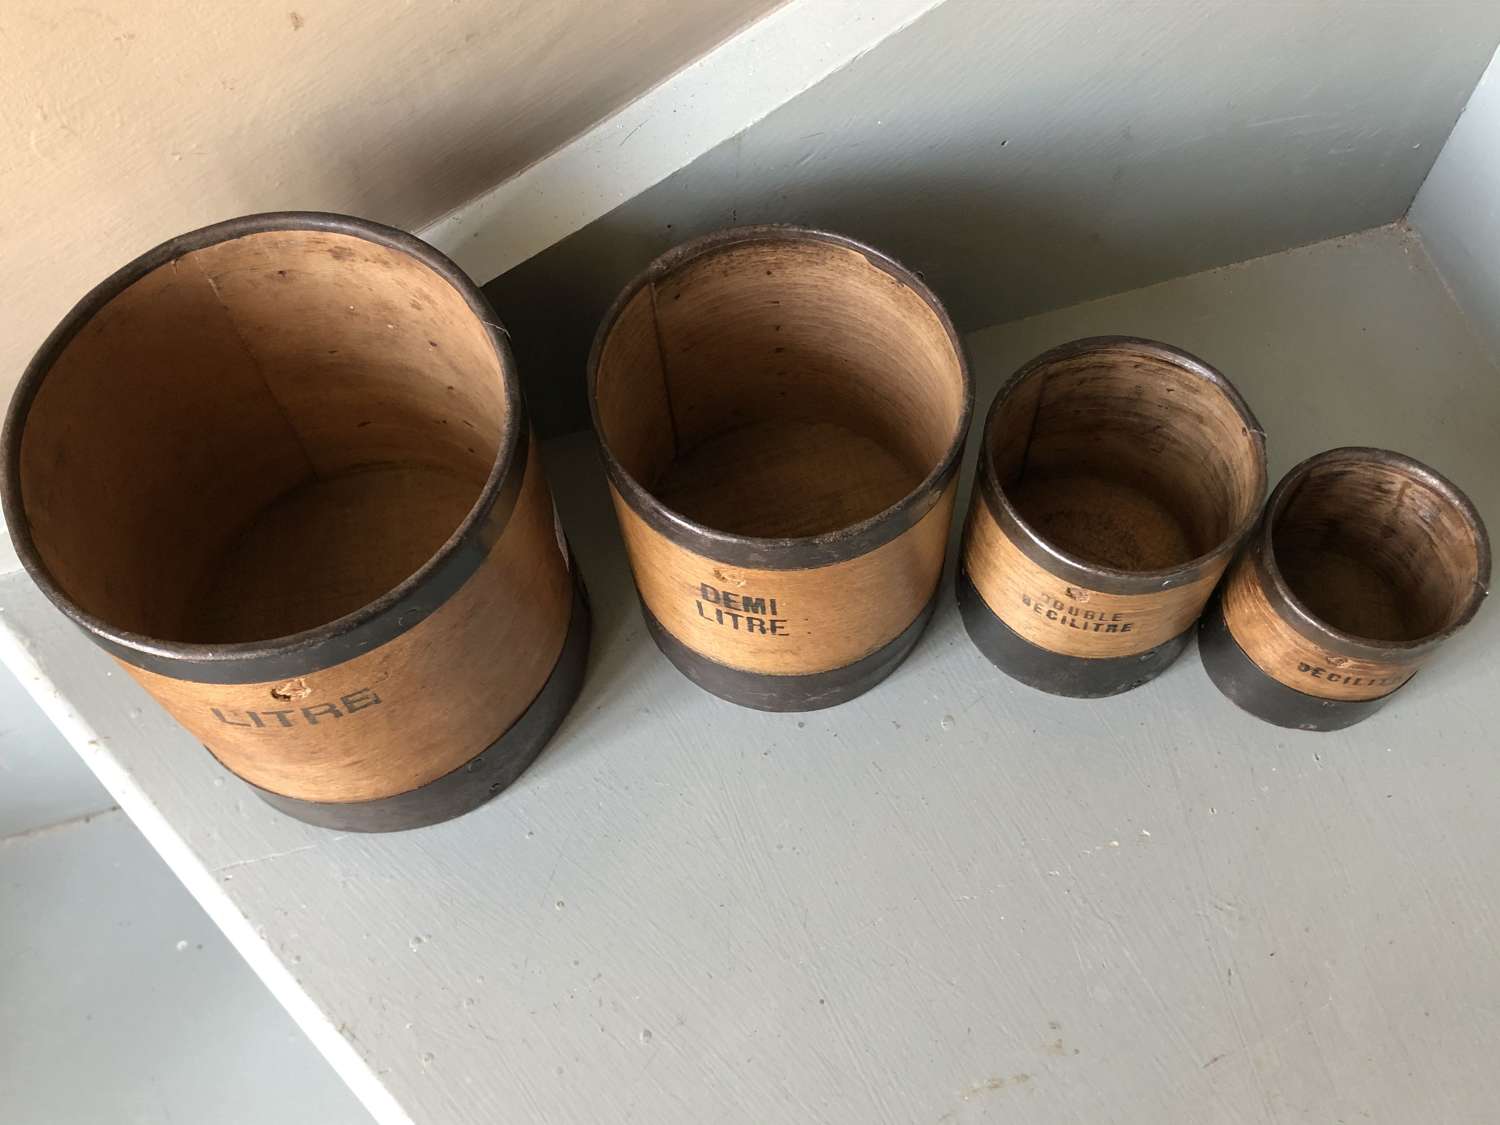 Matching Set Of French Grain Measures